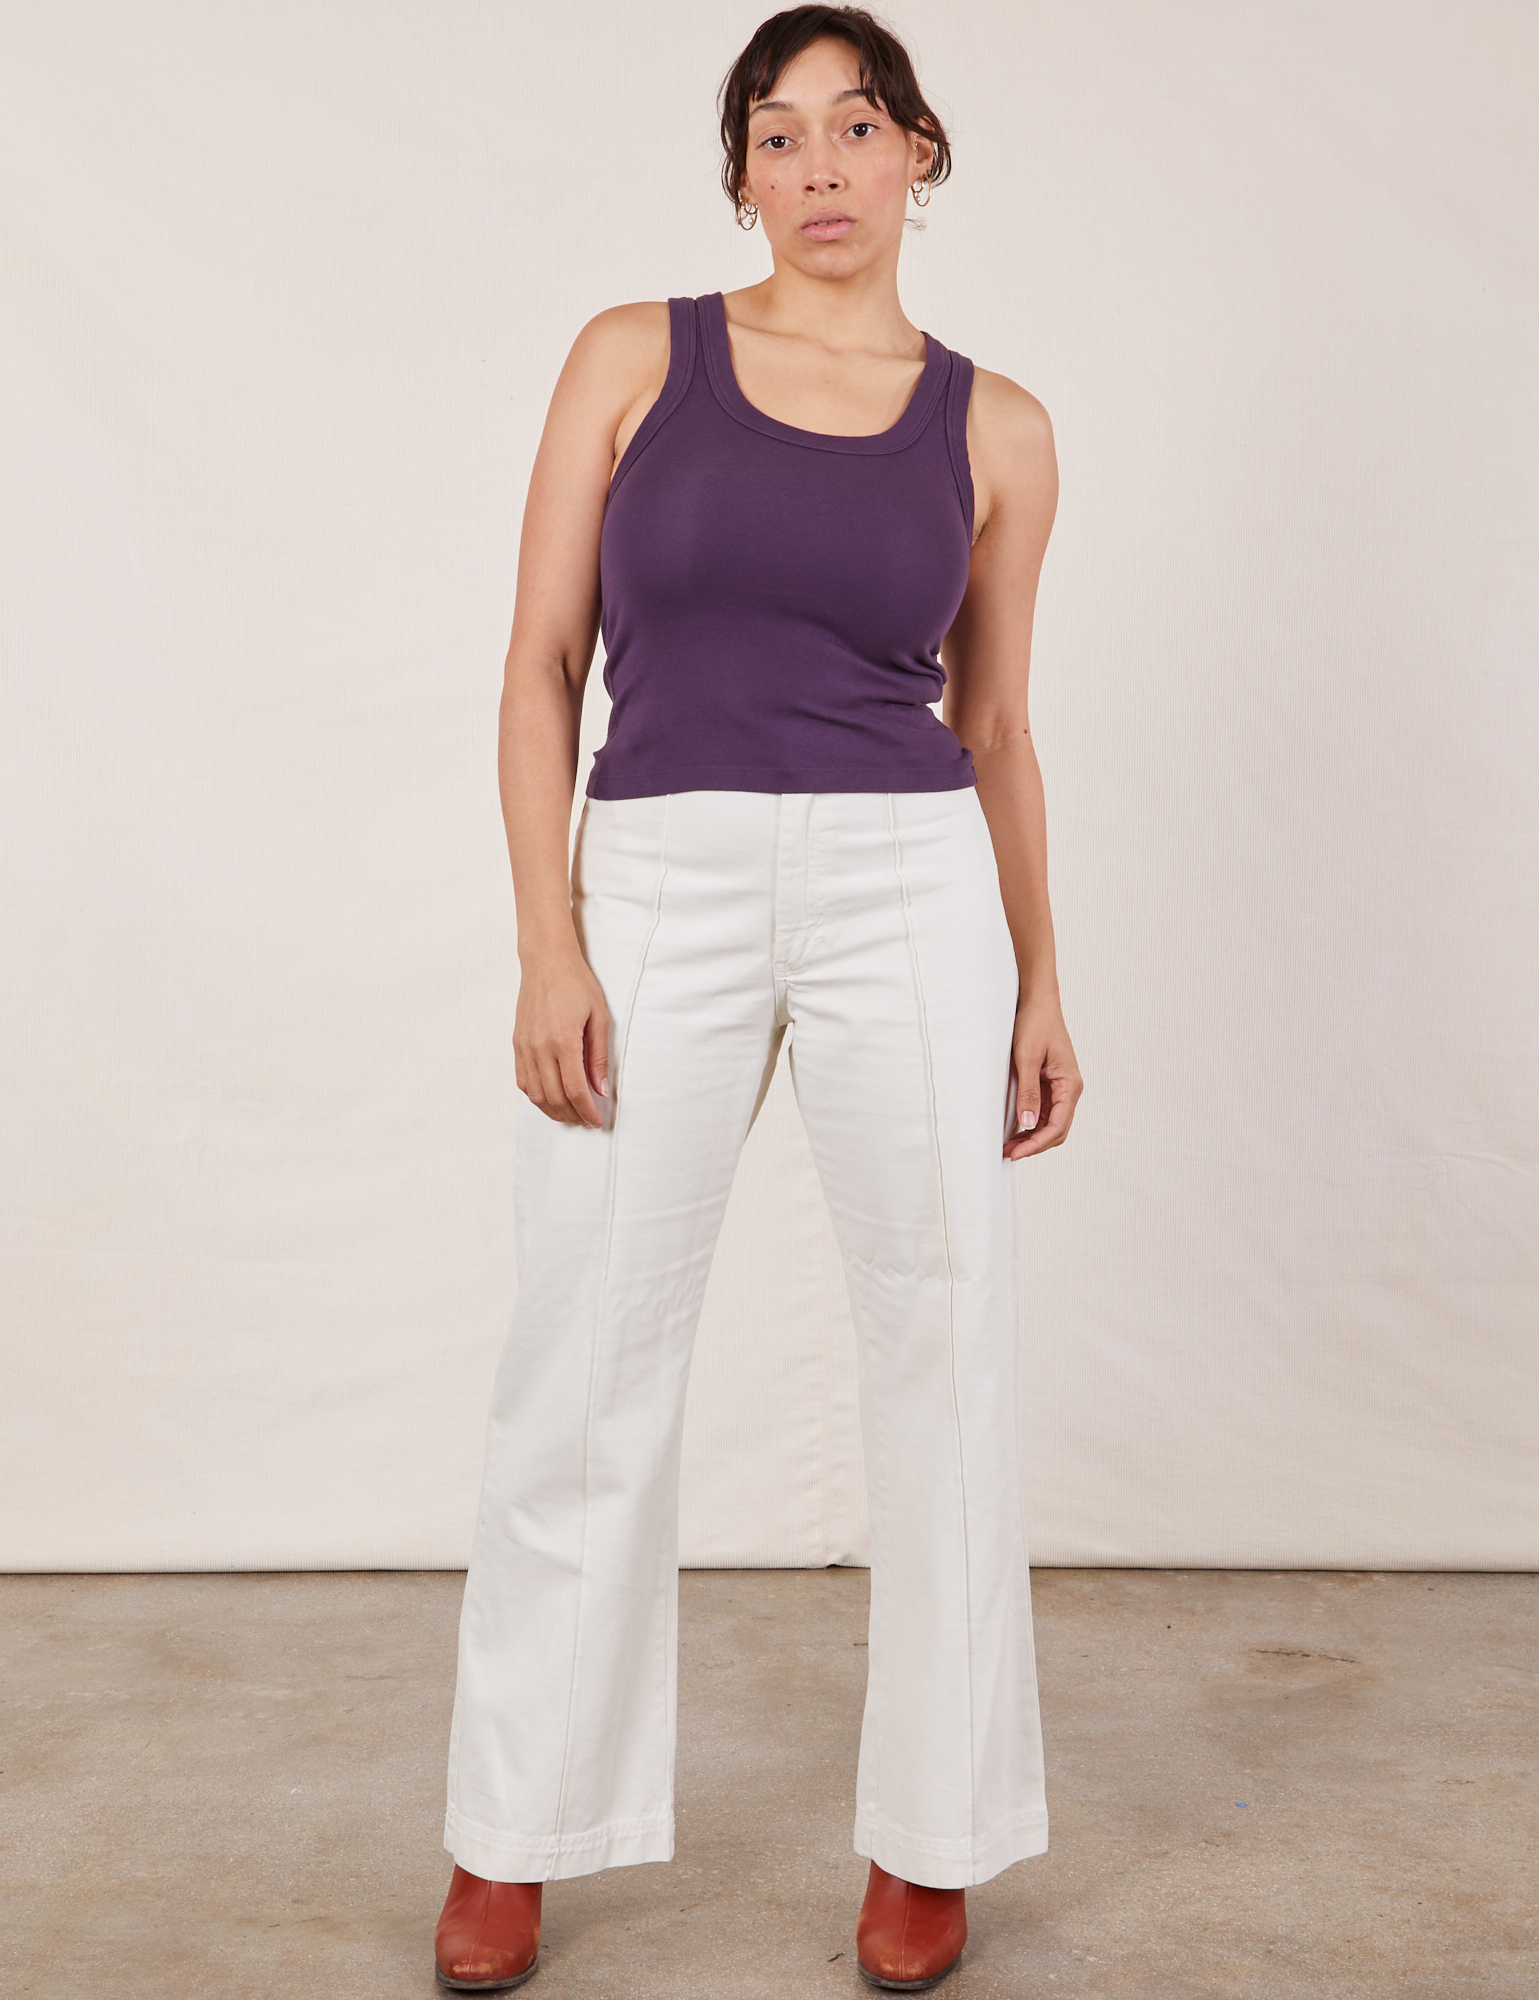 Tiara is 5’4” and wearing XS Tank Top in Nebula Purple paired with vintage tee off-white Western Pants